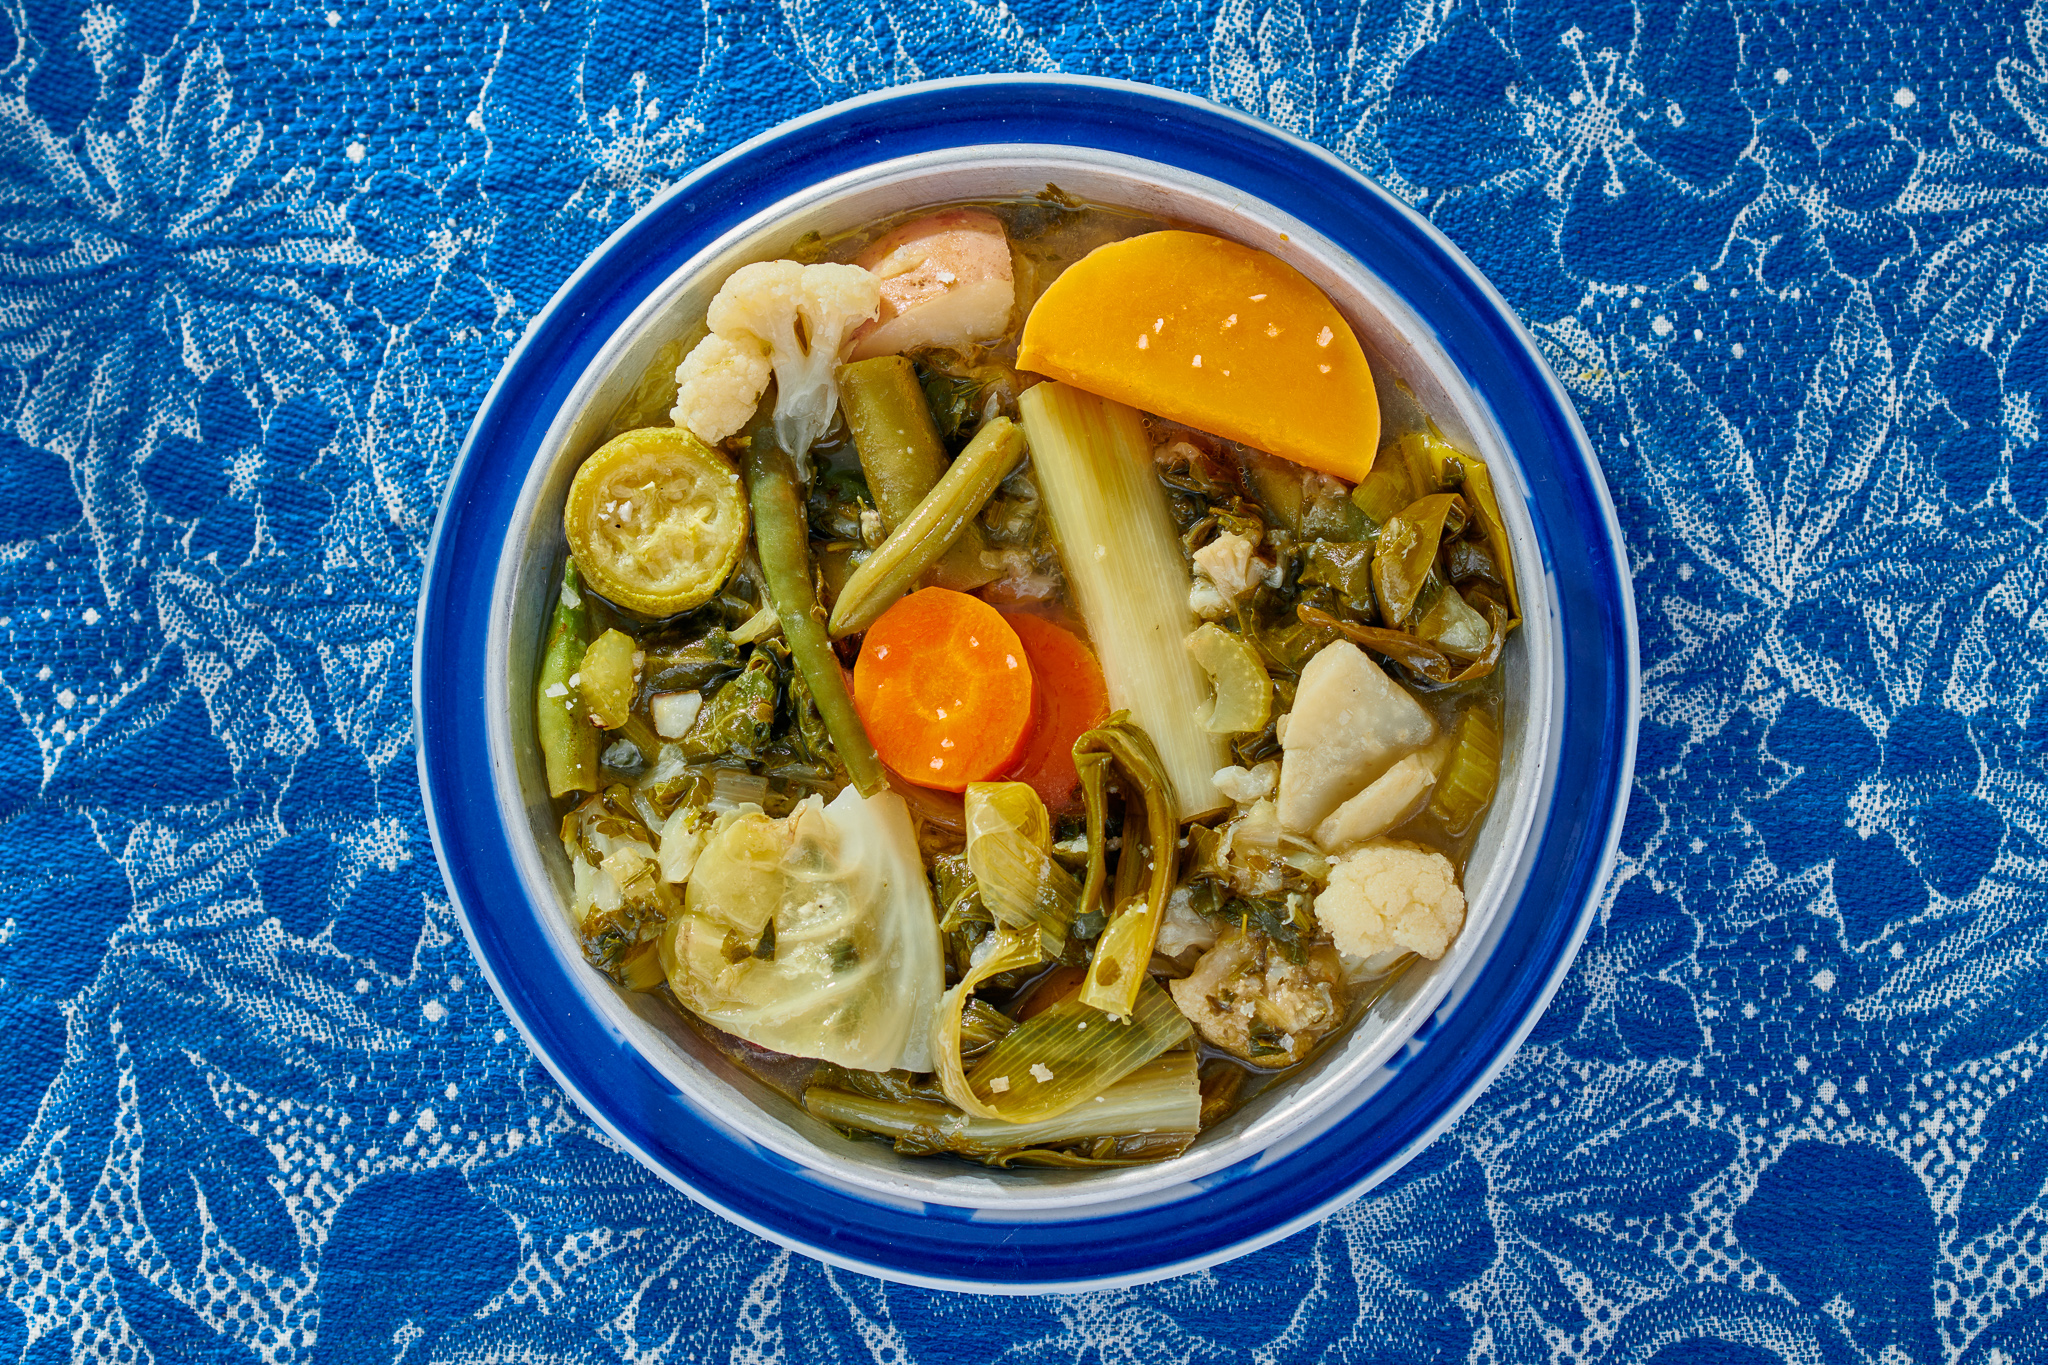 Vegetables in broth in blue bowl on blue tablecloth